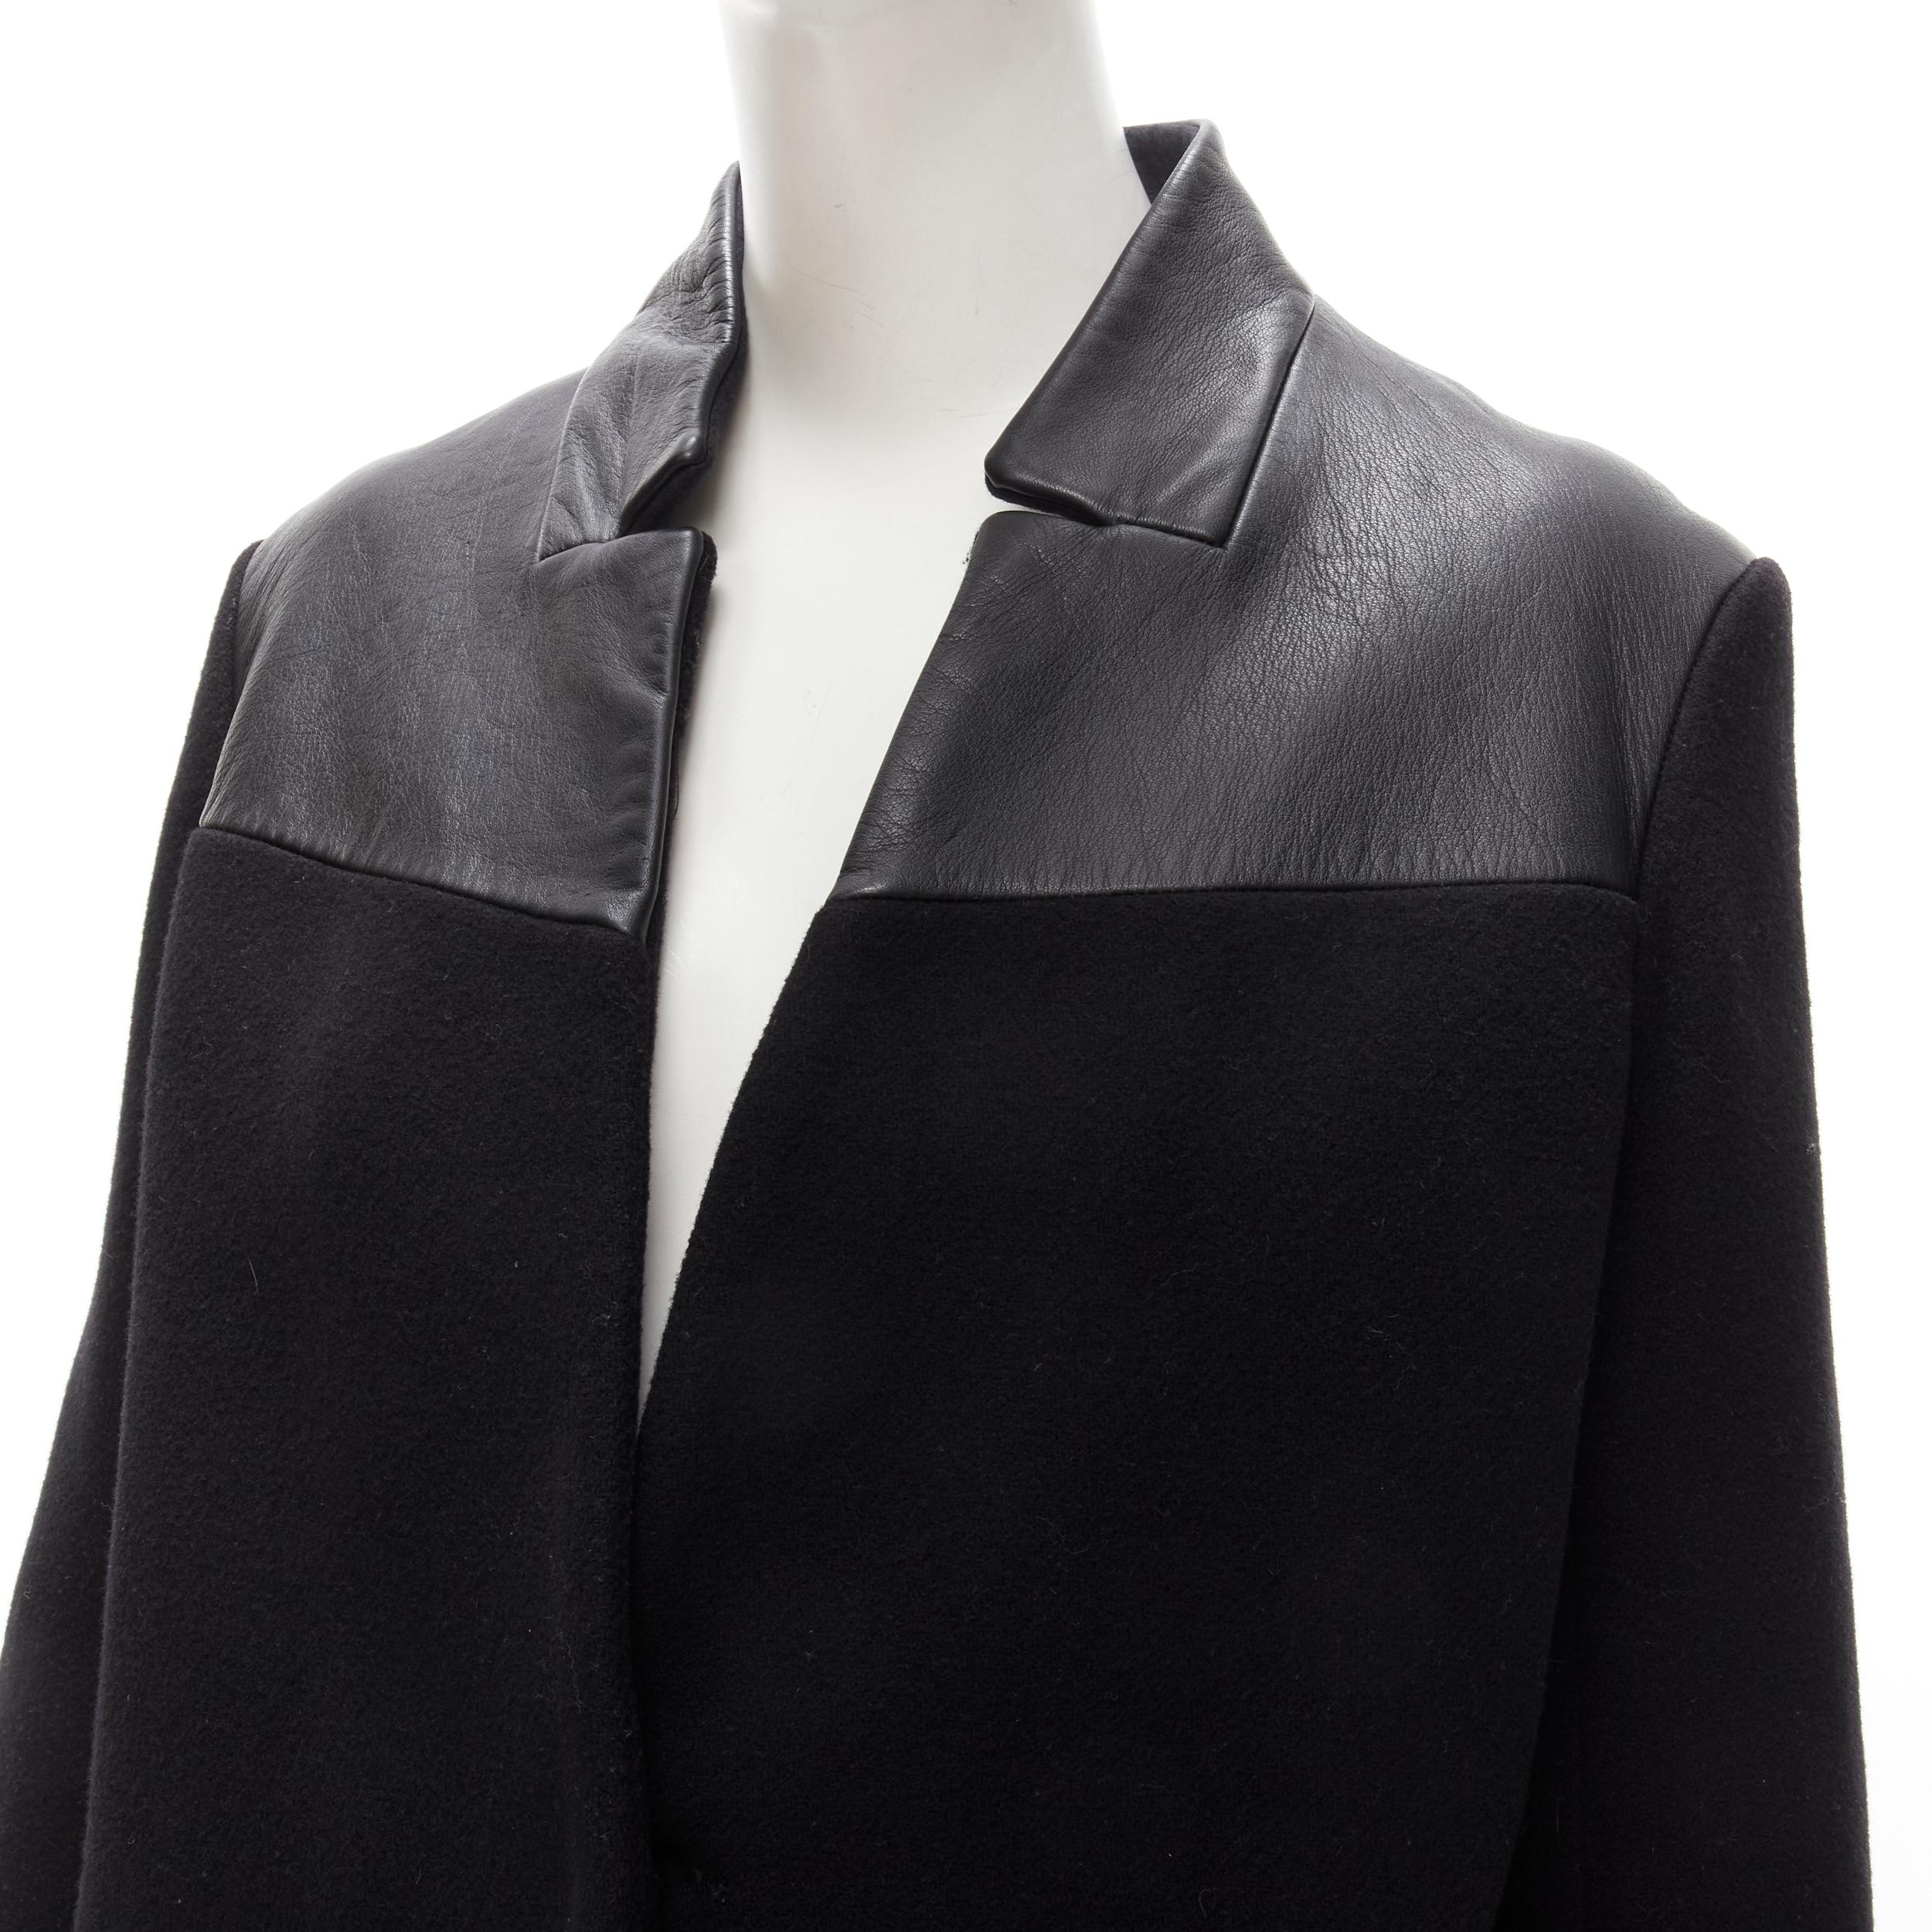 MAJE Sirop black calfskin leather trim wool collarless coat US2 S
Brand: Maje
Extra Detail: Single concealed button front. Dual side seam pockets.

CONDITION:
Condition: Excellent, this item was pre-owned and is in excellent condition. Crease on